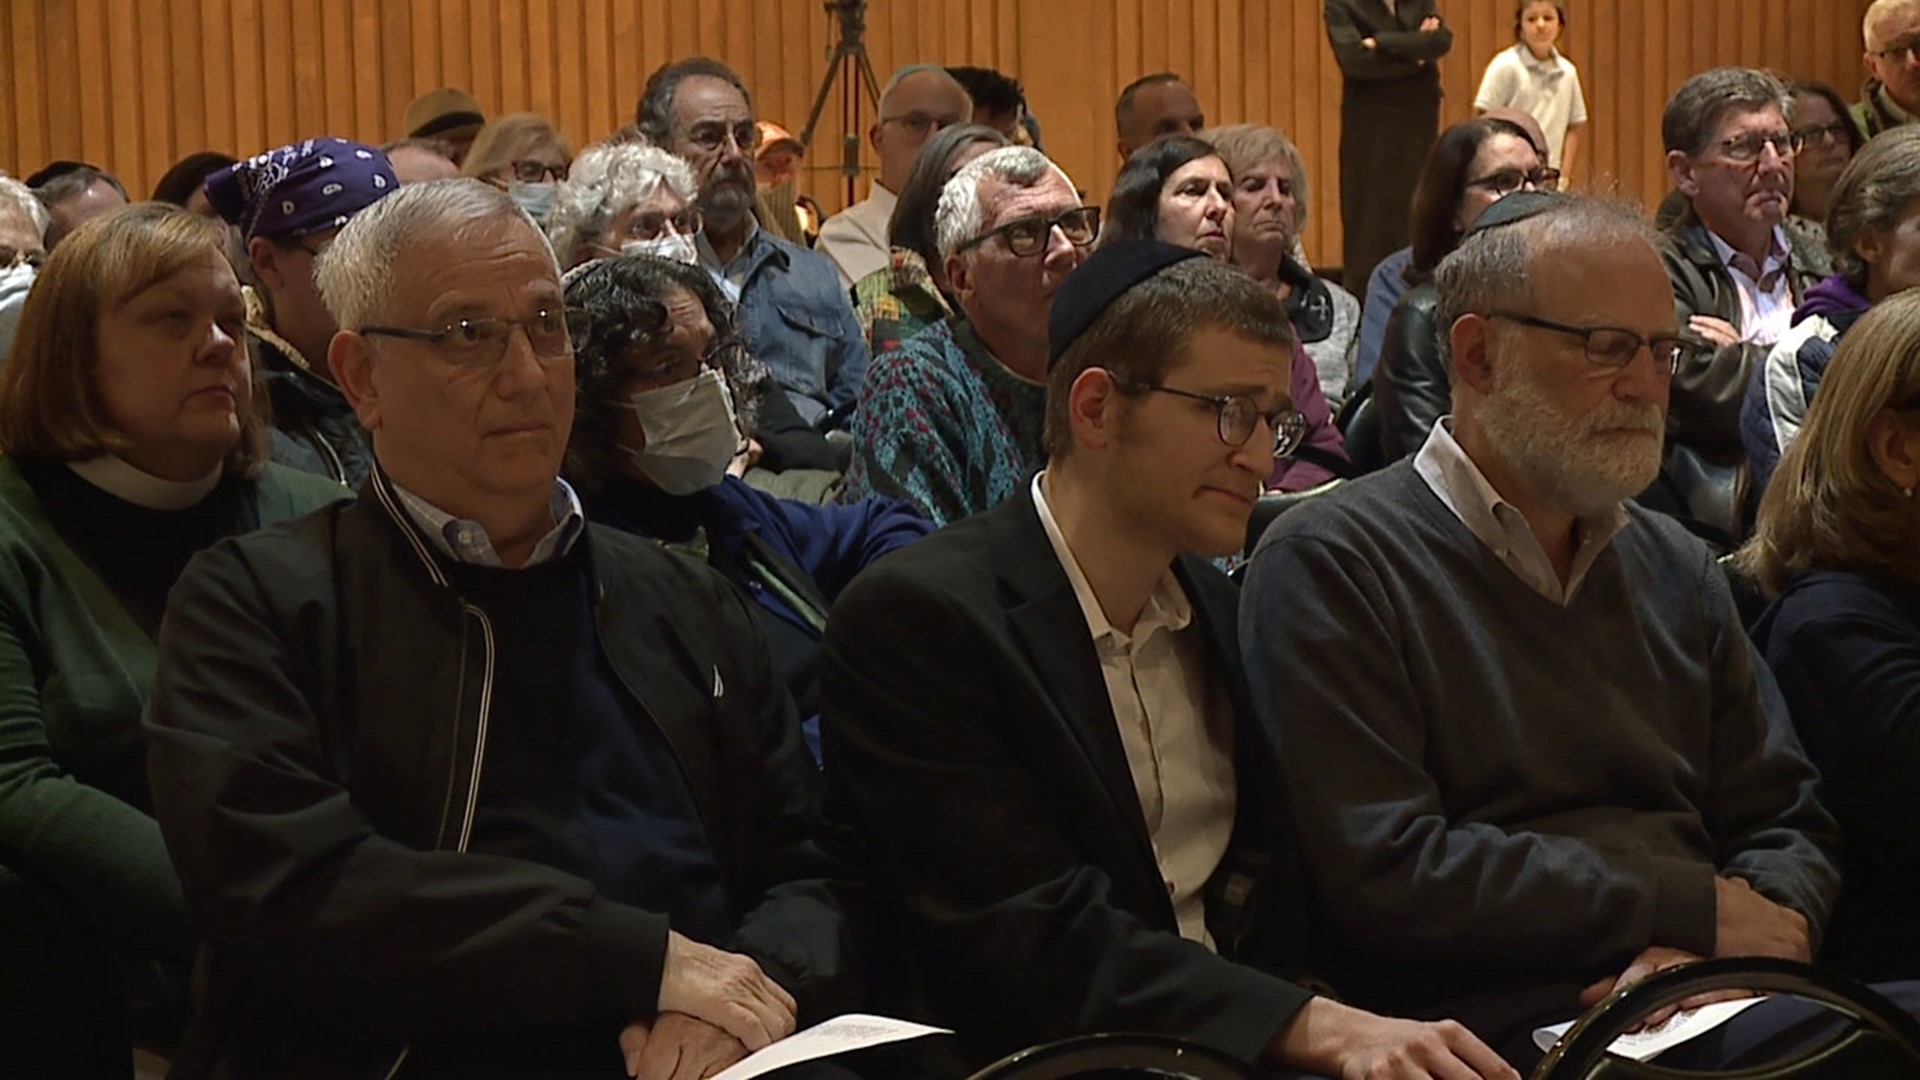 As the conflict in Israel continues, community members in Scranton came together.